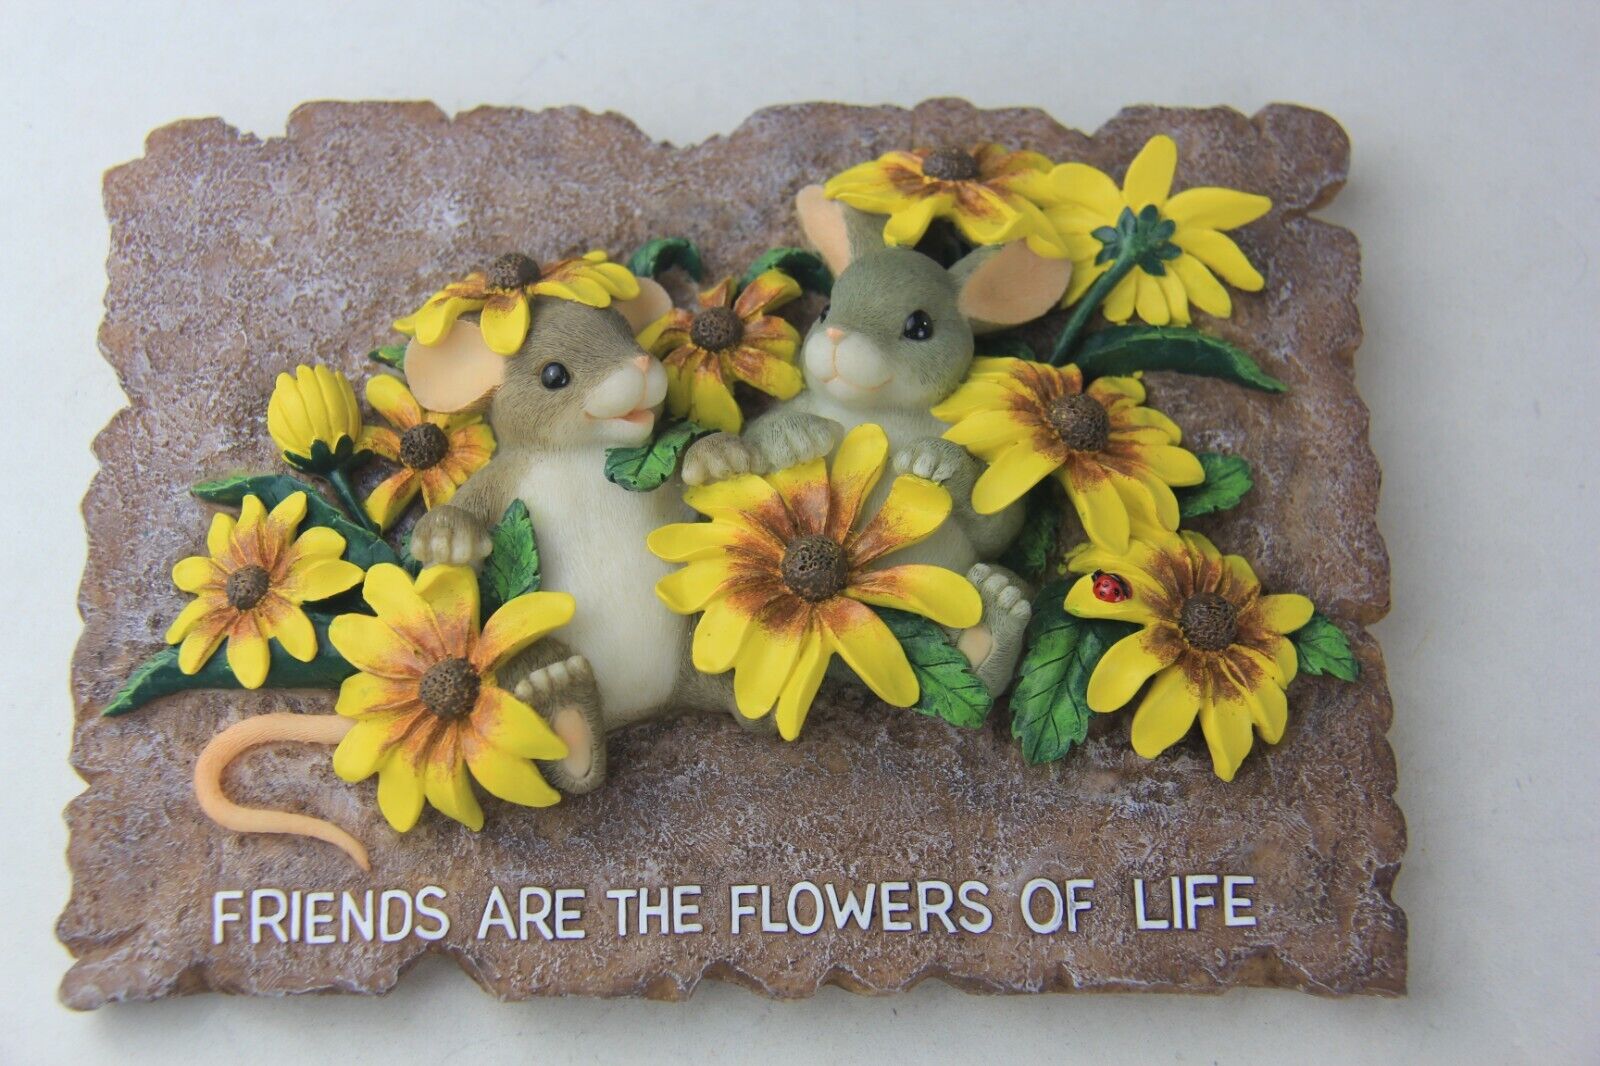 CHARMING TAILS SPRING GARDEN FRIENDS ARE THE FLOWERS OF LIFE MOUSE WALL PLAQUE